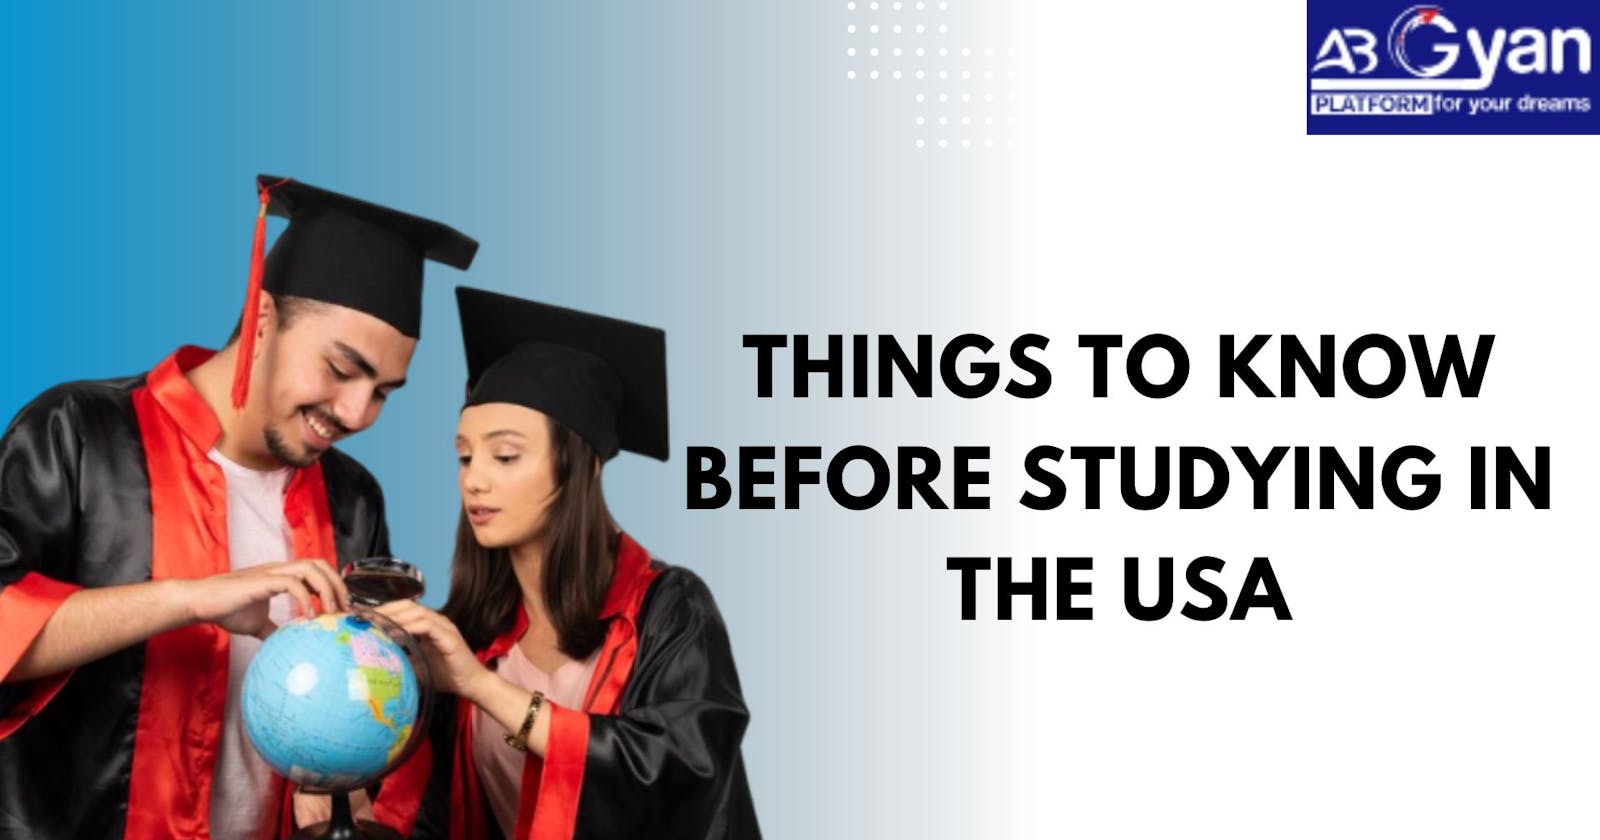 Things to Know Before Studying in the USA